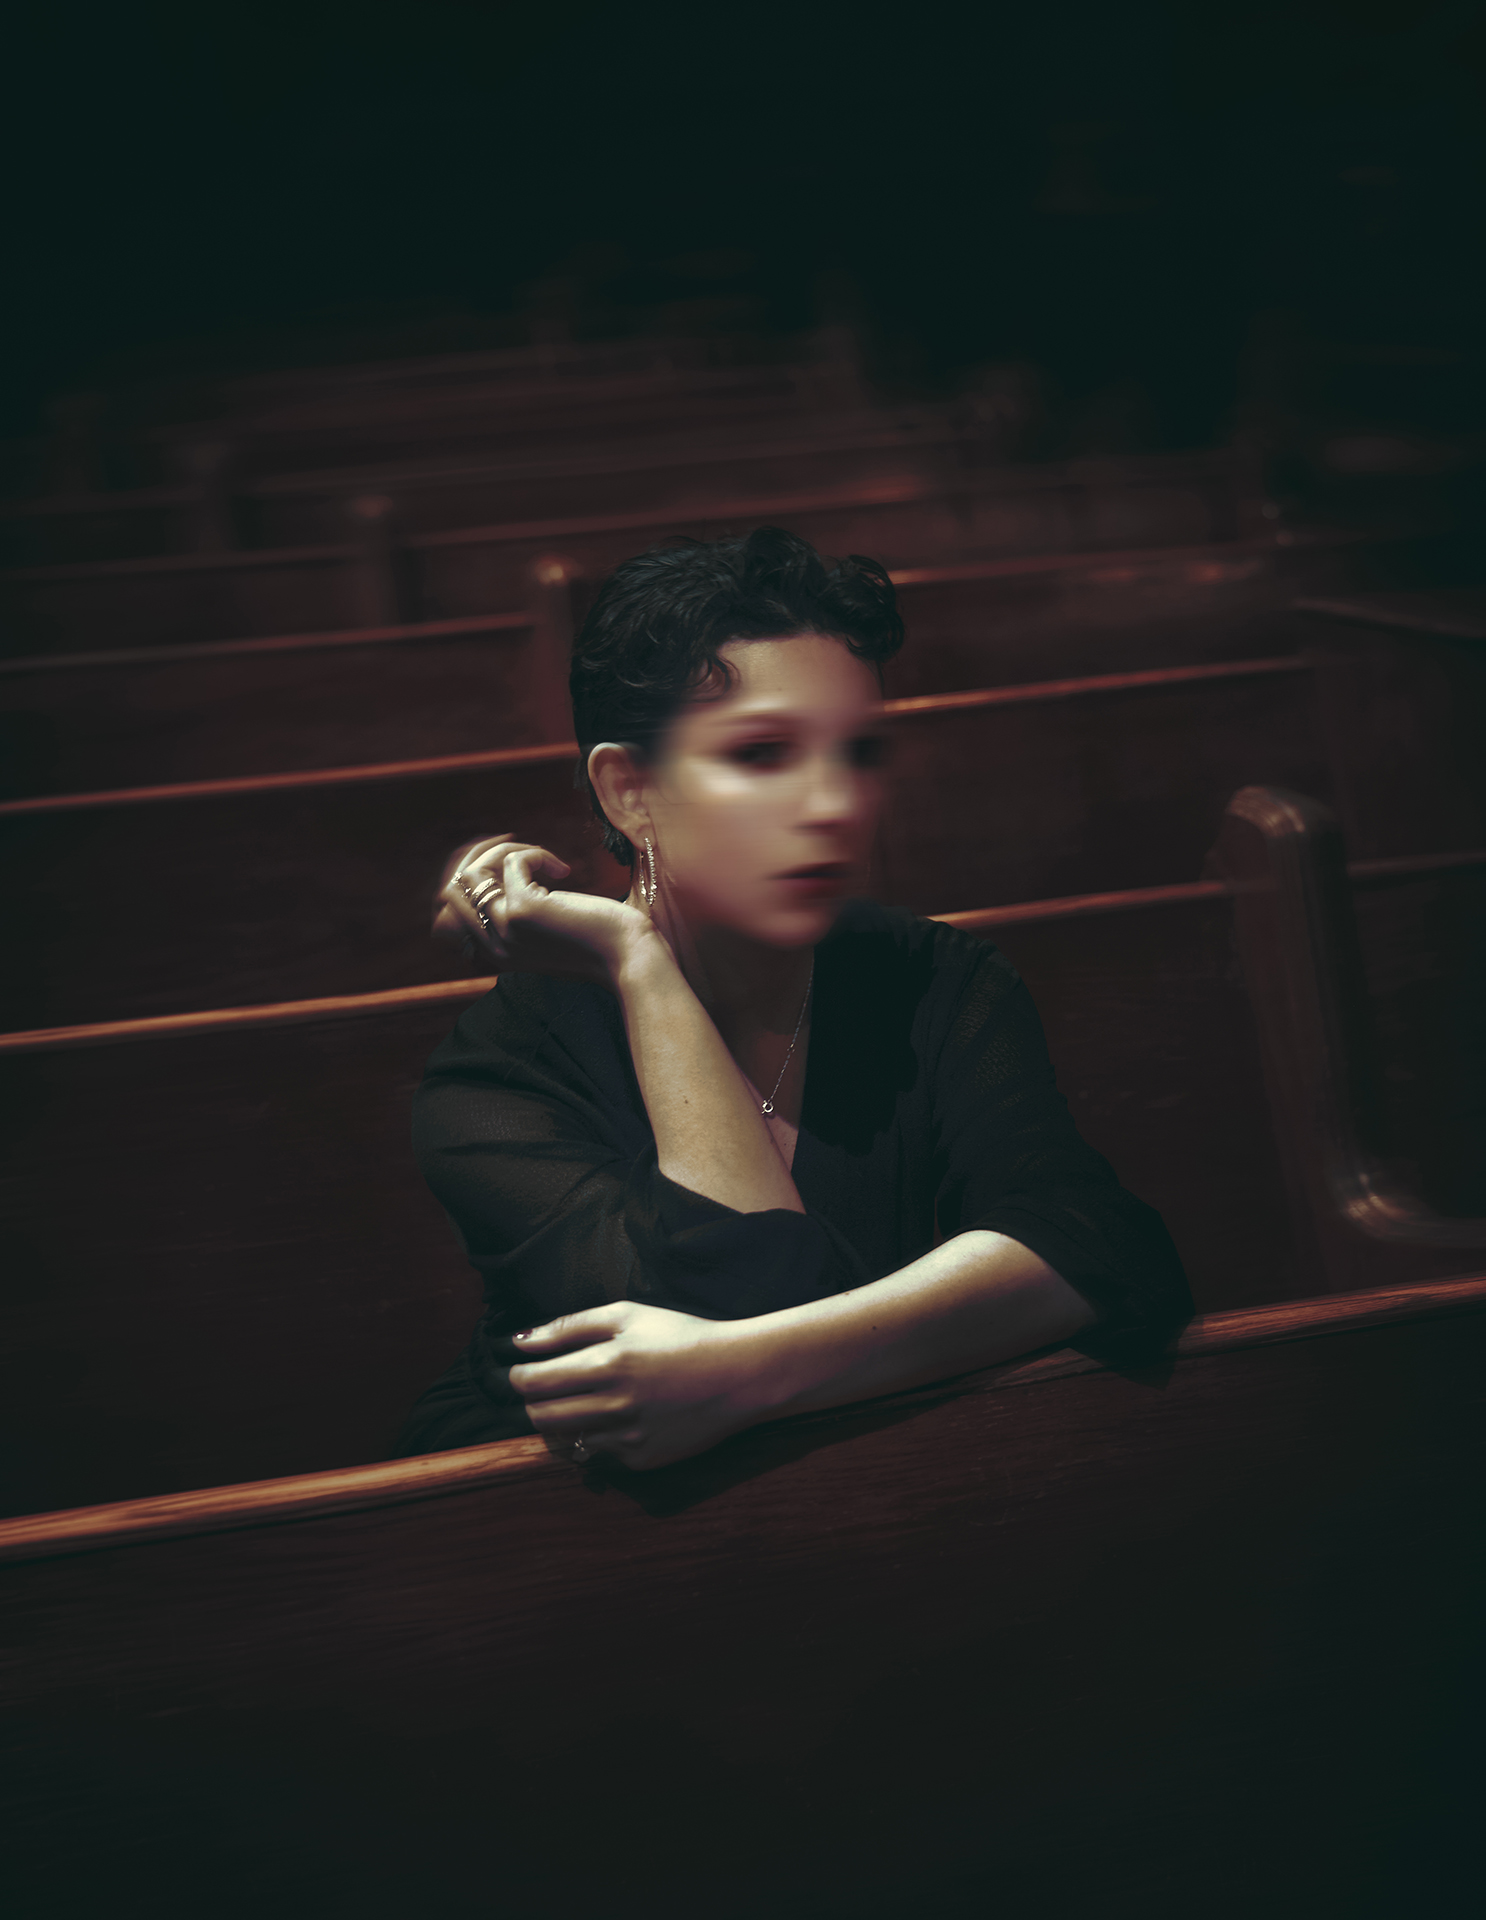 : A photo of a woman sitting in the benches at a church. She is wearing all black and her face is blurred out.